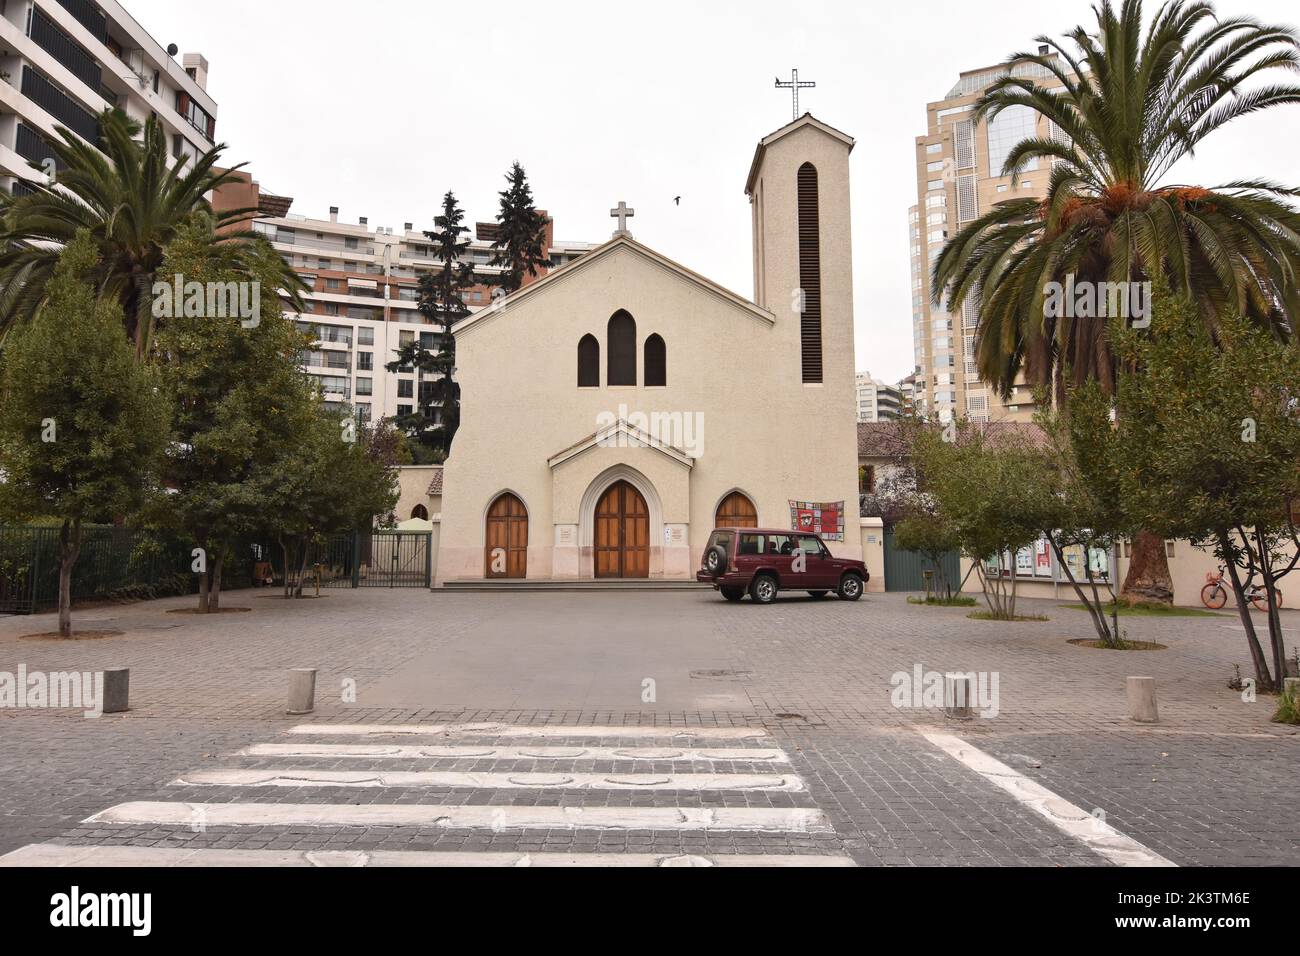 The Our Lady of the Angels Church in Santiago, Chile Stock Photo